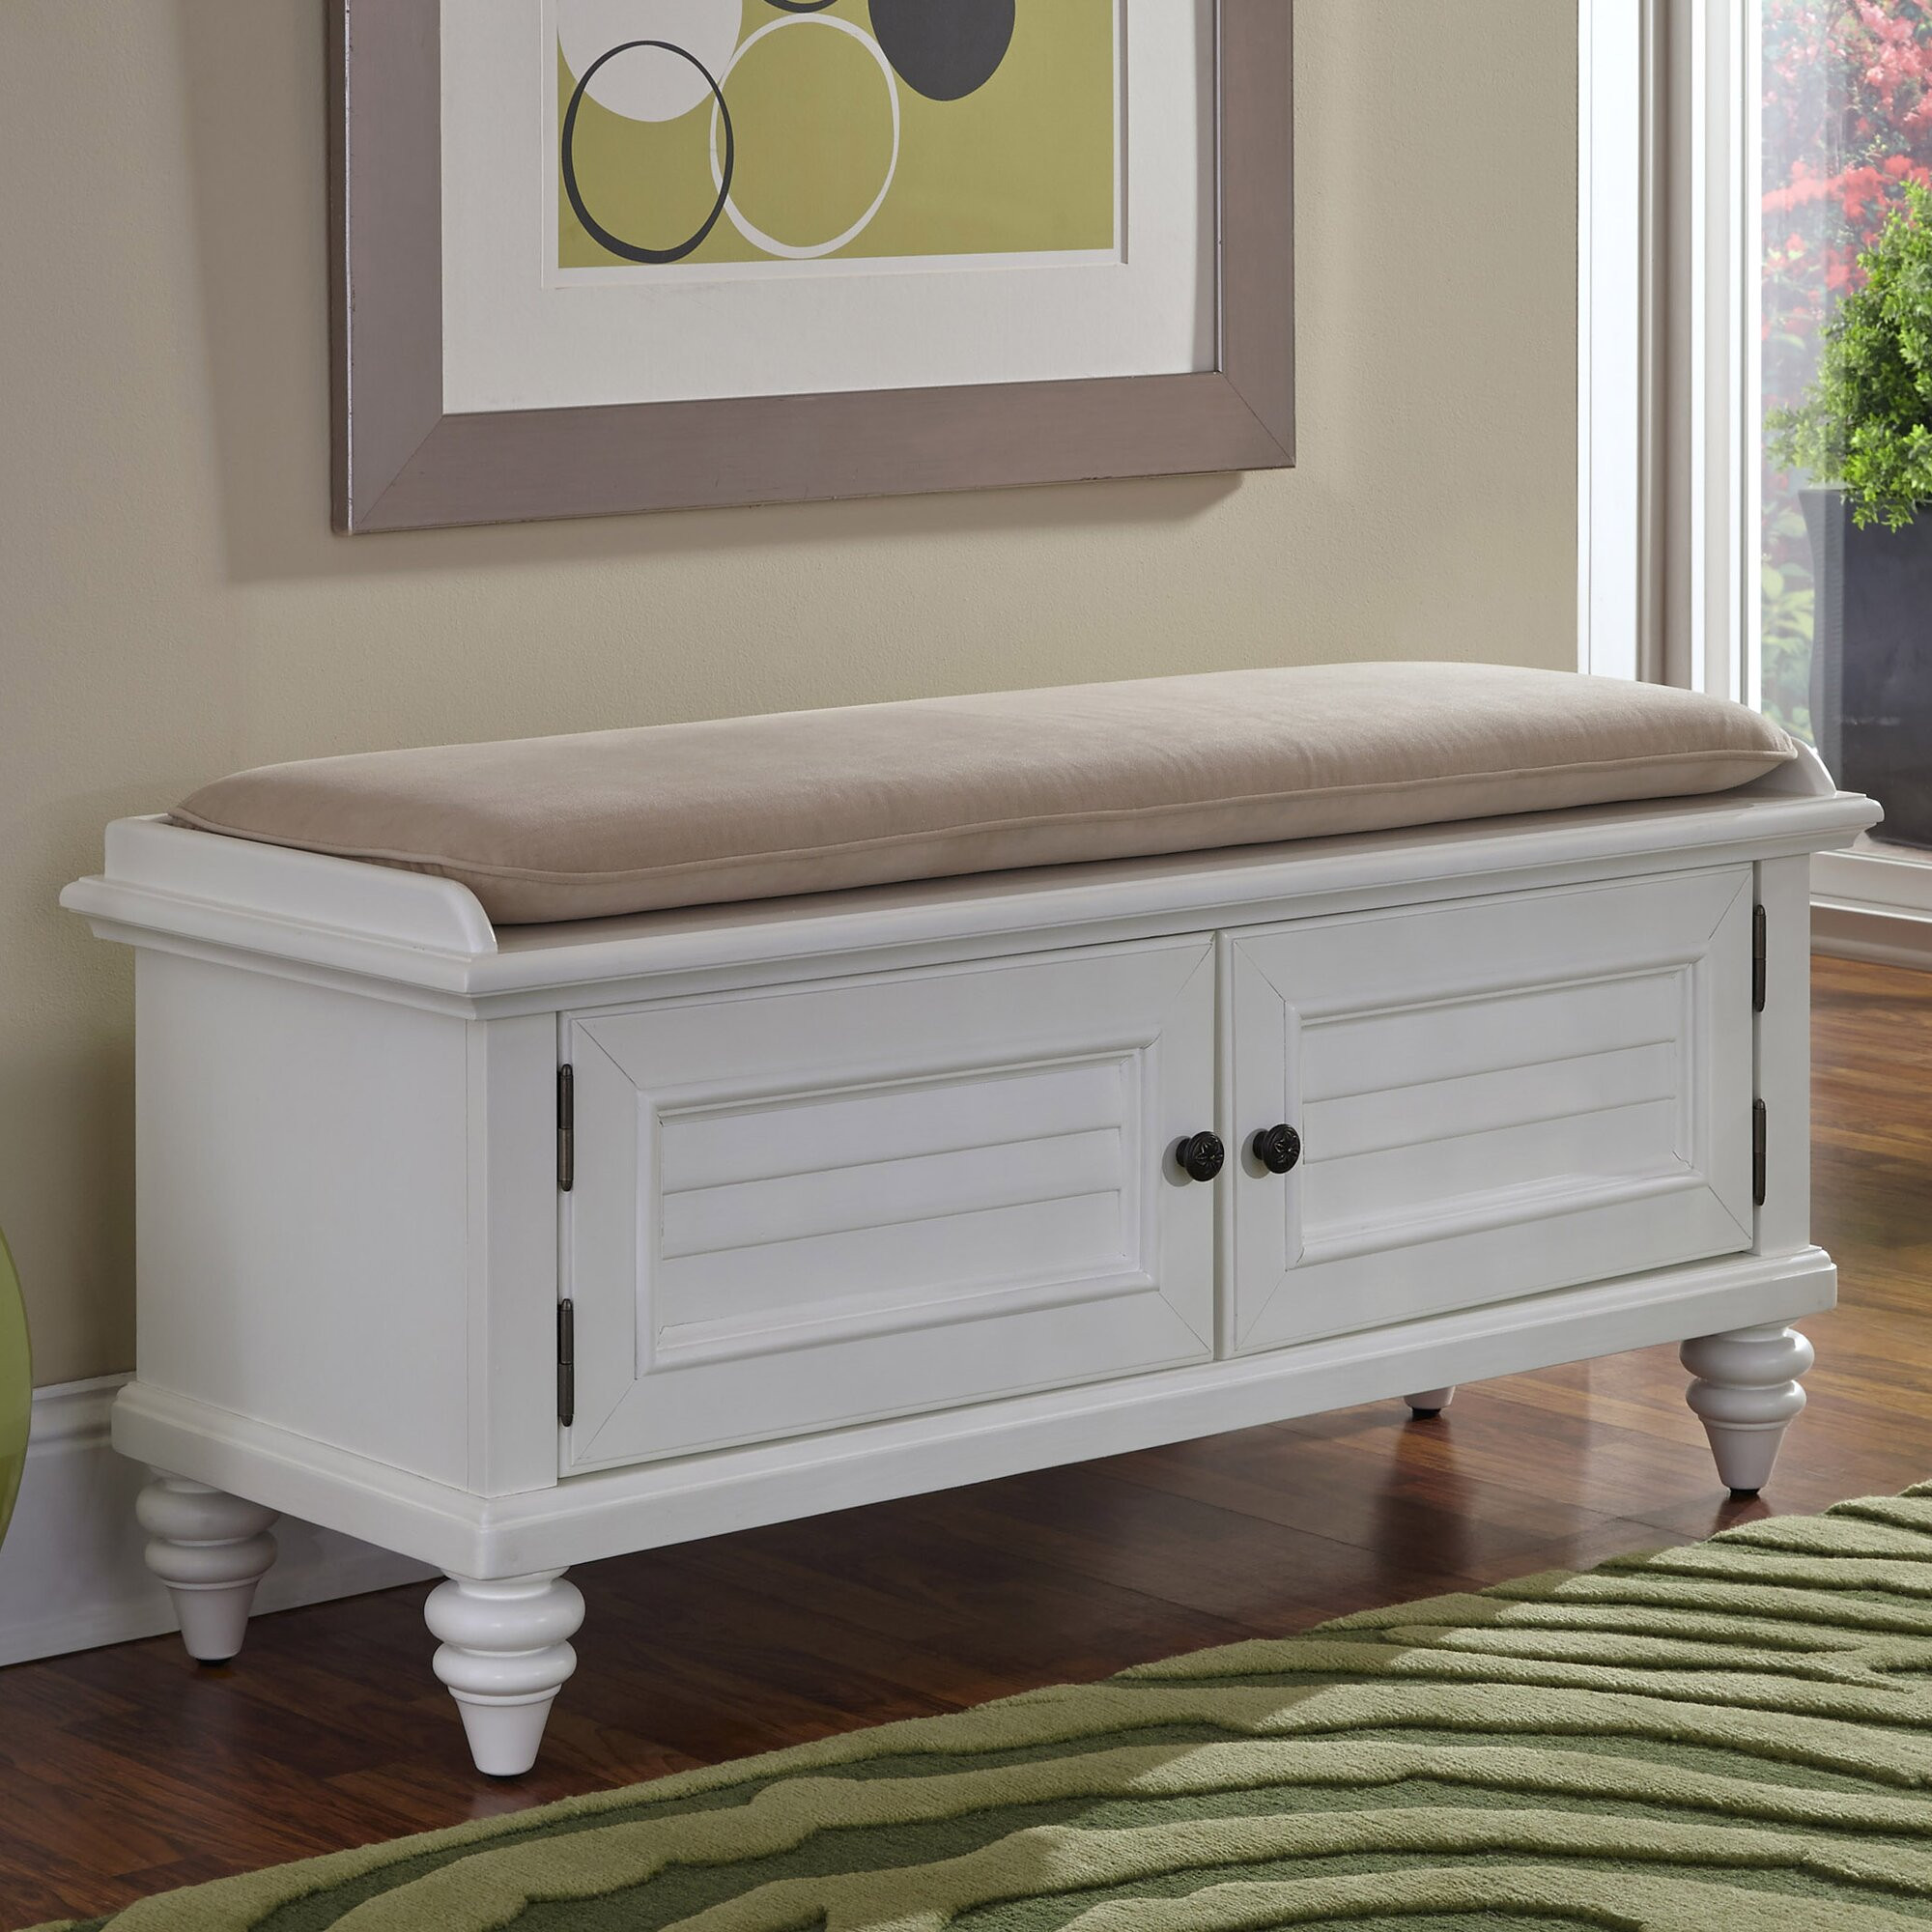 Entry Way Storage Bench
 Breakwater Bay Kenduskeag Upholstered Storage Entryway Bench & Reviews